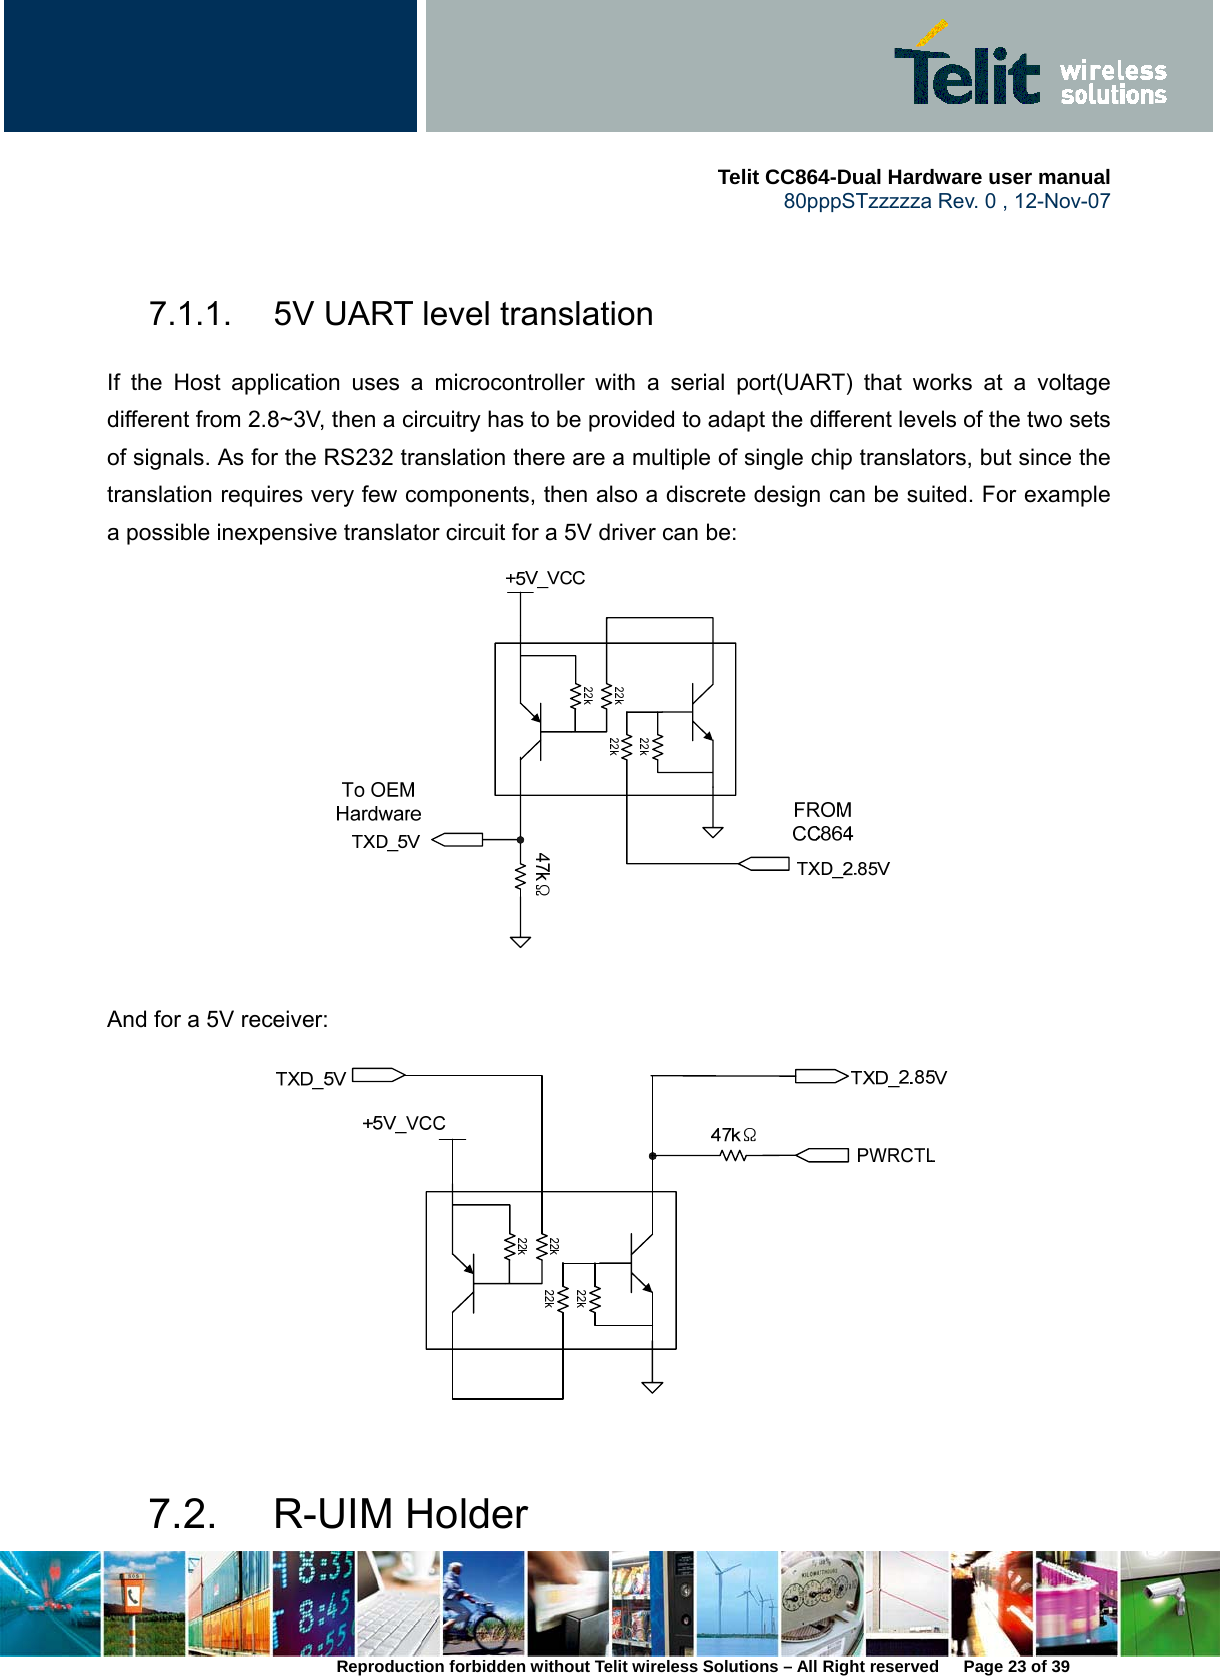     Telit CC864-Dual Hardware user manual   80pppSTzzzzza Rev. 0 , 12-Nov-07 Reproduction forbidden without Telit wireless Solutions – All Right reserved      Page 23 of 39  7.1.1.  5V UART level translation If the Host application uses a microcontroller with a serial port(UART) that works at a voltage different from 2.8~3V, then a circuitry has to be provided to adapt the different levels of the two sets of signals. As for the RS232 translation there are a multiple of single chip translators, but since the translation requires very few components, then also a discrete design can be suited. For example a possible inexpensive translator circuit for a 5V driver can be:     And for a 5V receiver:   7.2. R-UIM Holder 